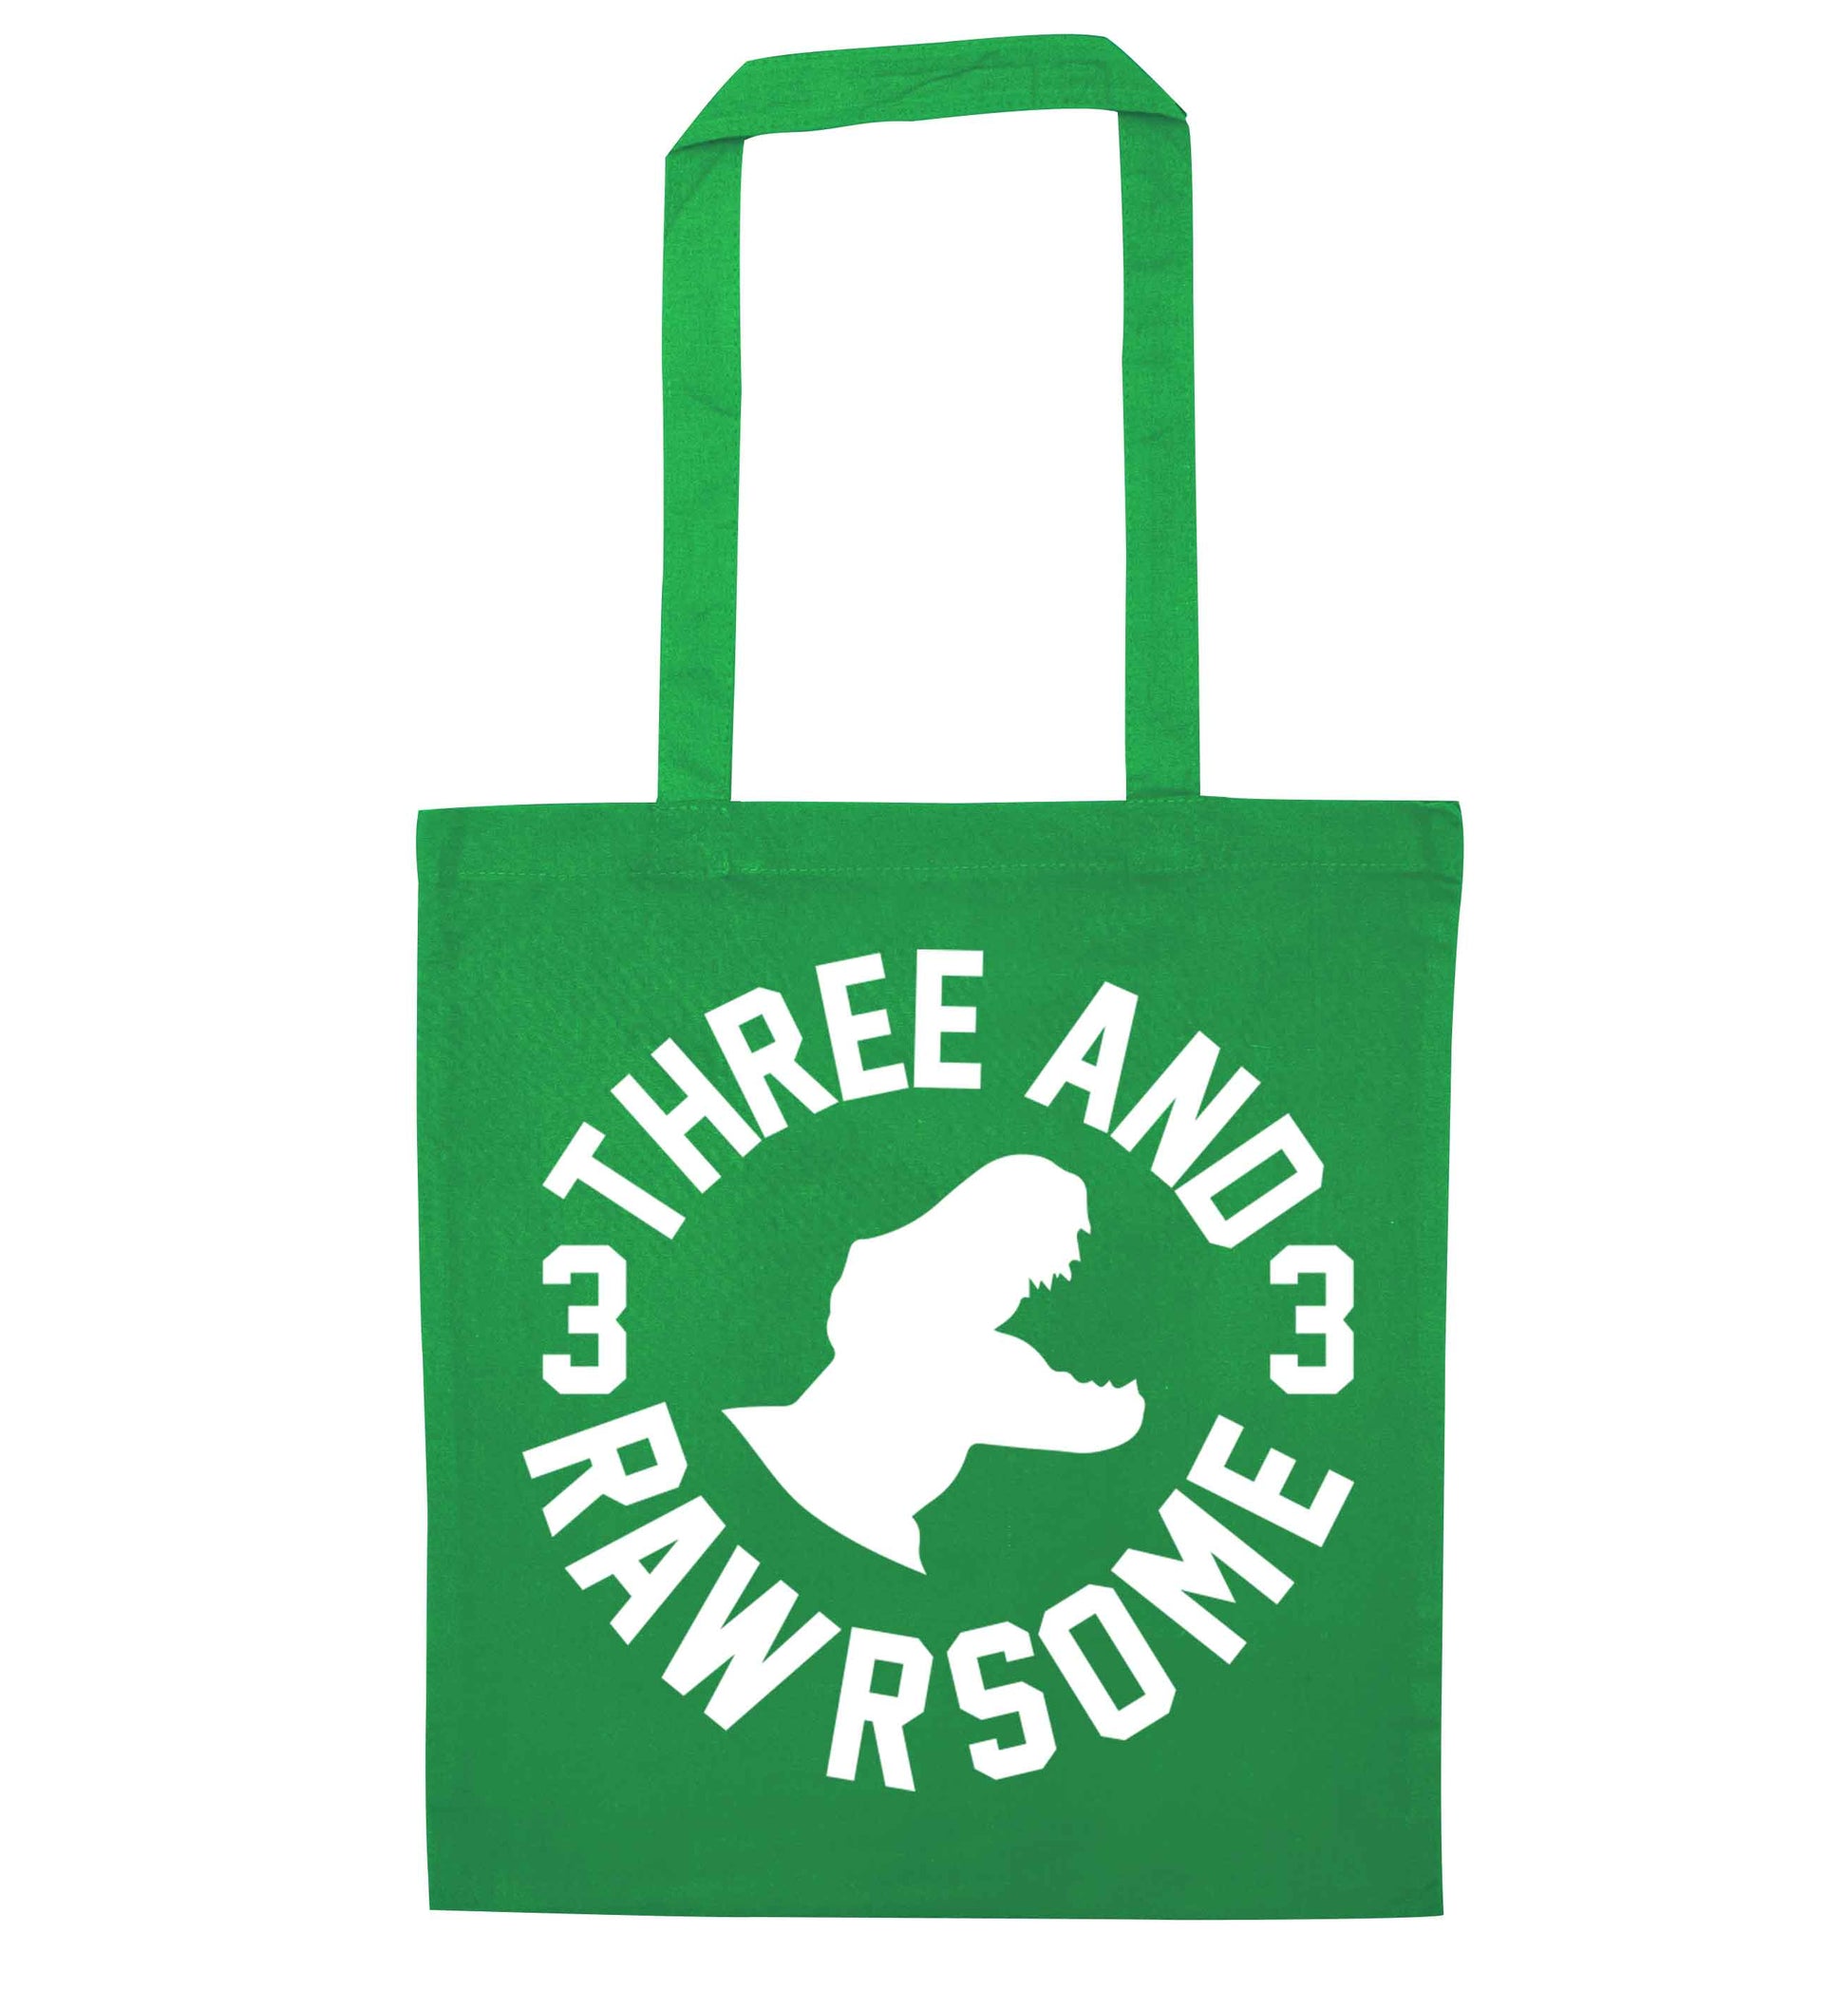 Three and rawrsome green tote bag